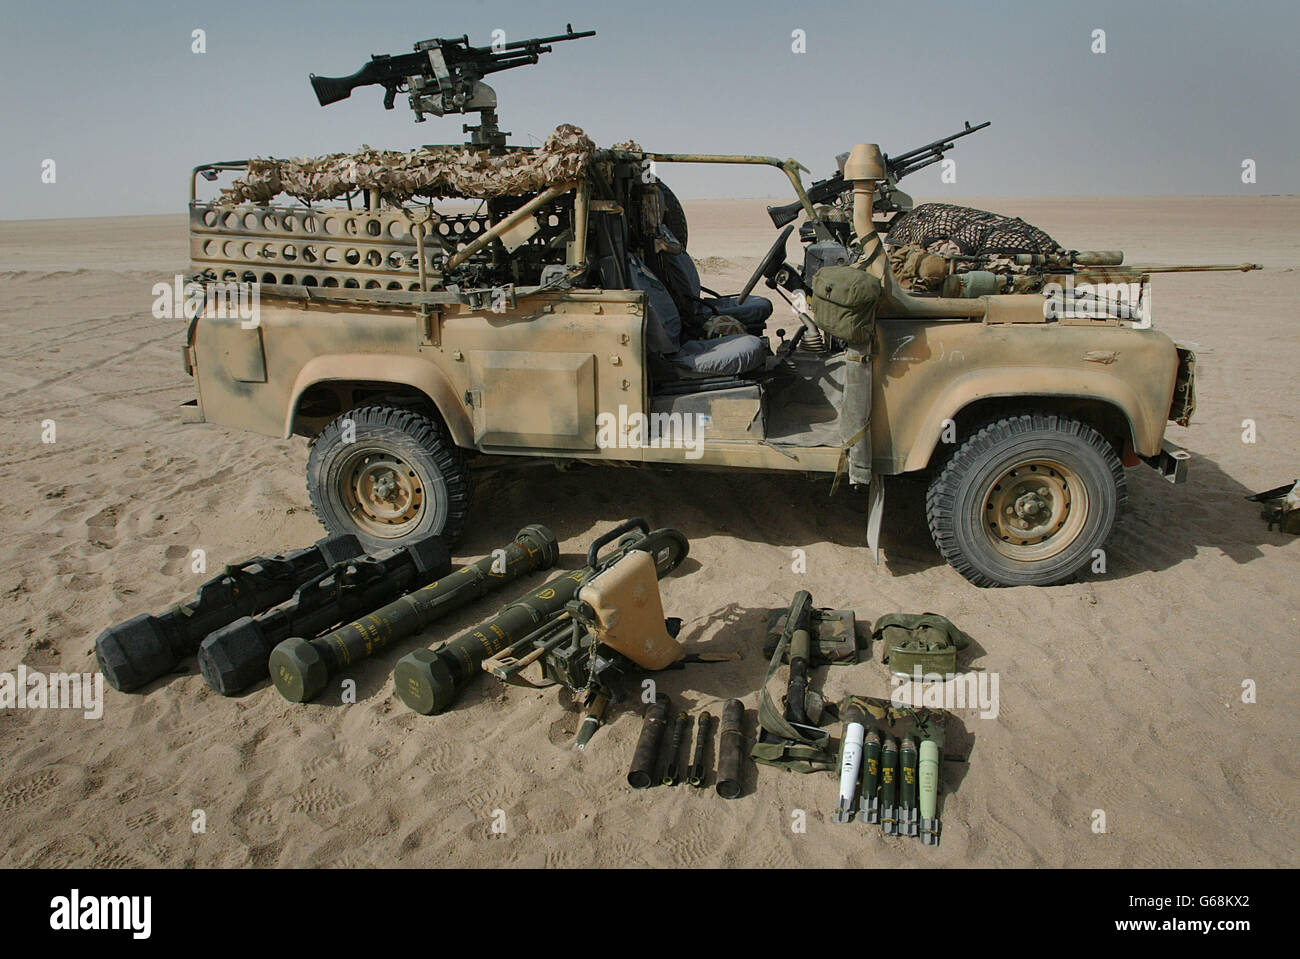 A Weapons Mounted Insatllation Kit sit in the Kuwait desert as members of a Brigade Patrol Troop, part of the Brigade Recce Force, who are an elite team within the Marine Commando Brigade, prepare for possible miltary action. * These specially adapted Land Rovers (Weapons Mounted Installation Kit) enable the troop to tackle some of the most difficult terrain. They are led by Sgt. Joe Gillespie. Stock Photo